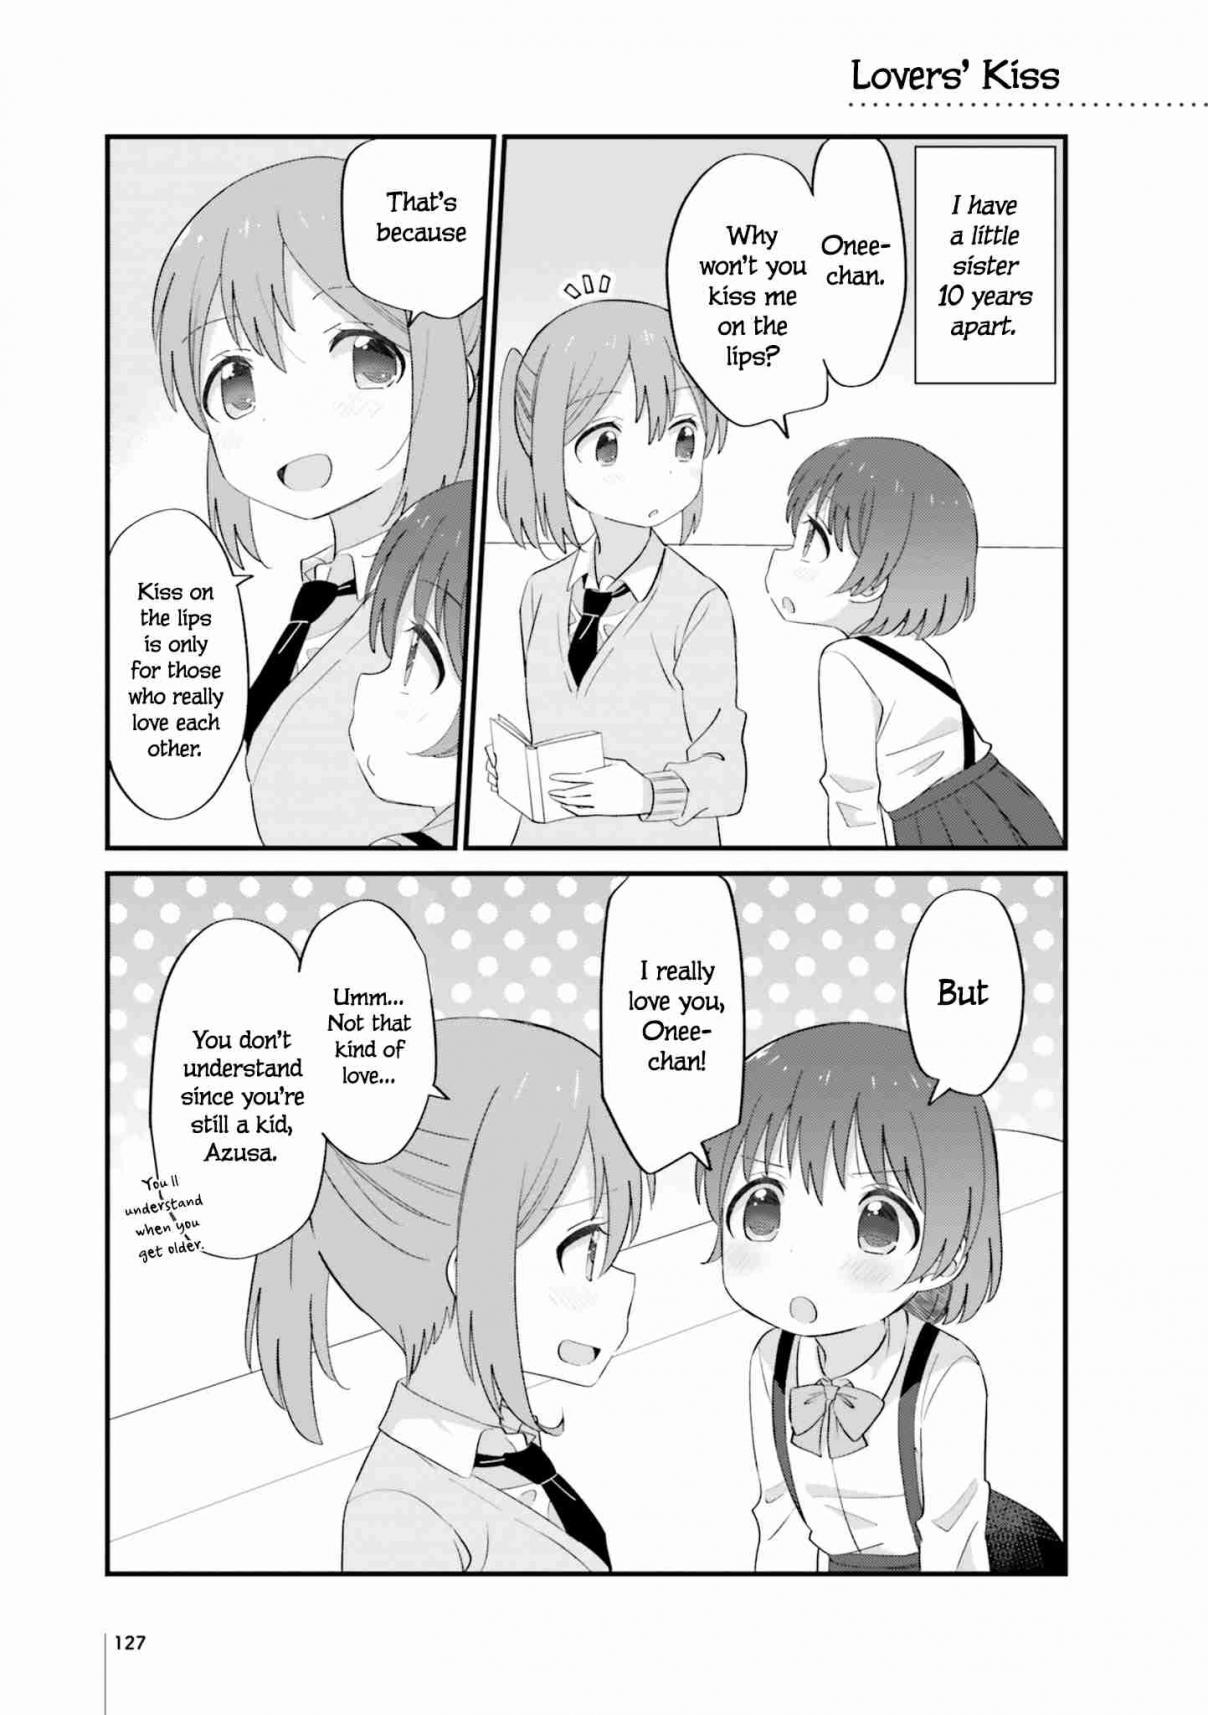 Age Gap Sisters Who Have Reached That Age Vol. 1 Ch. 33 Lovers' Kiss